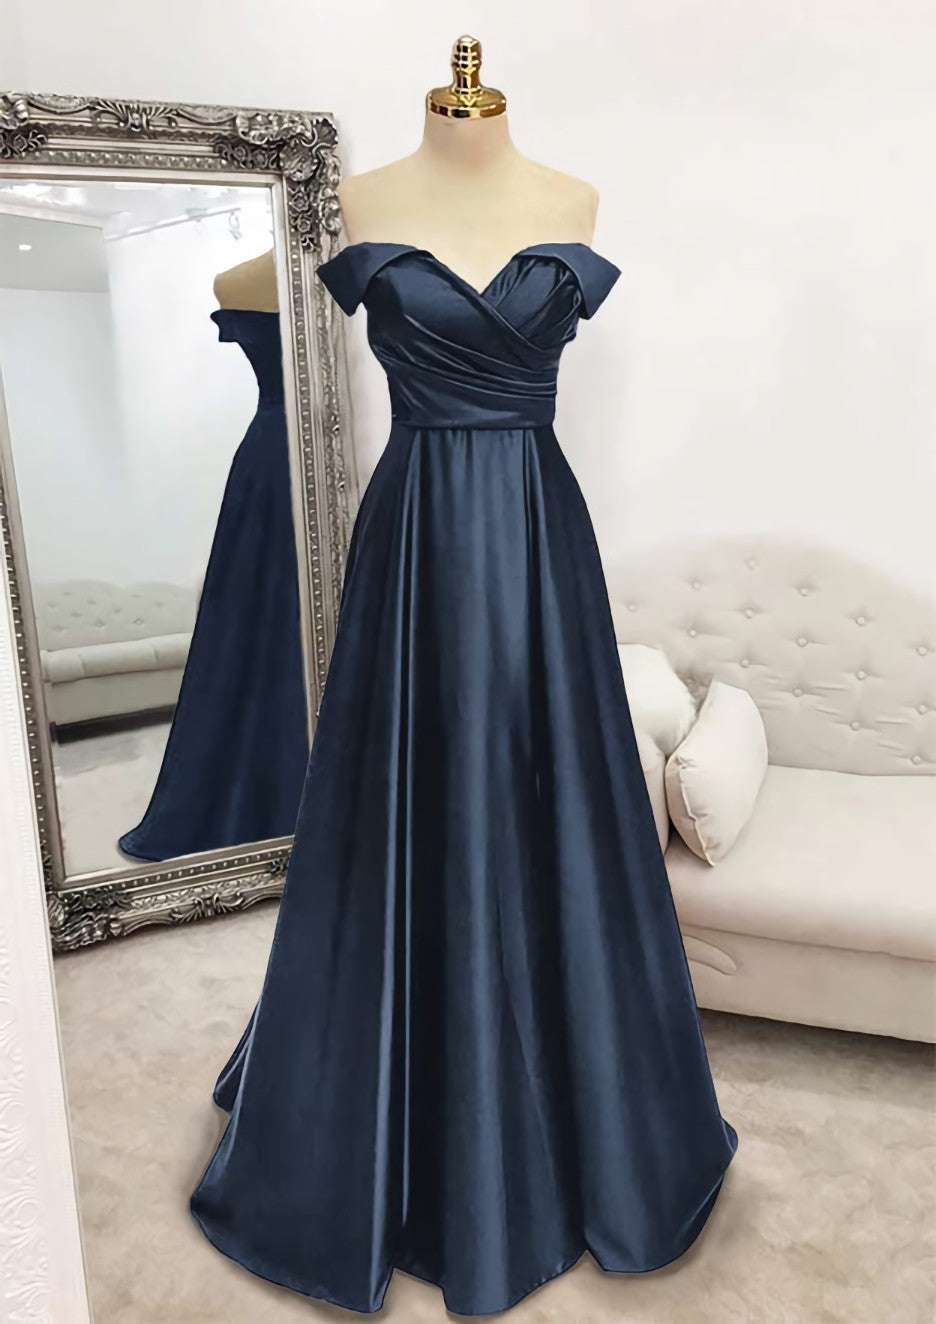 A-line Off-the-Shoulder Sleeveless Long/Floor-Length Satin Corset Prom Dress With Pleated Gowns, Evening Dress Sale